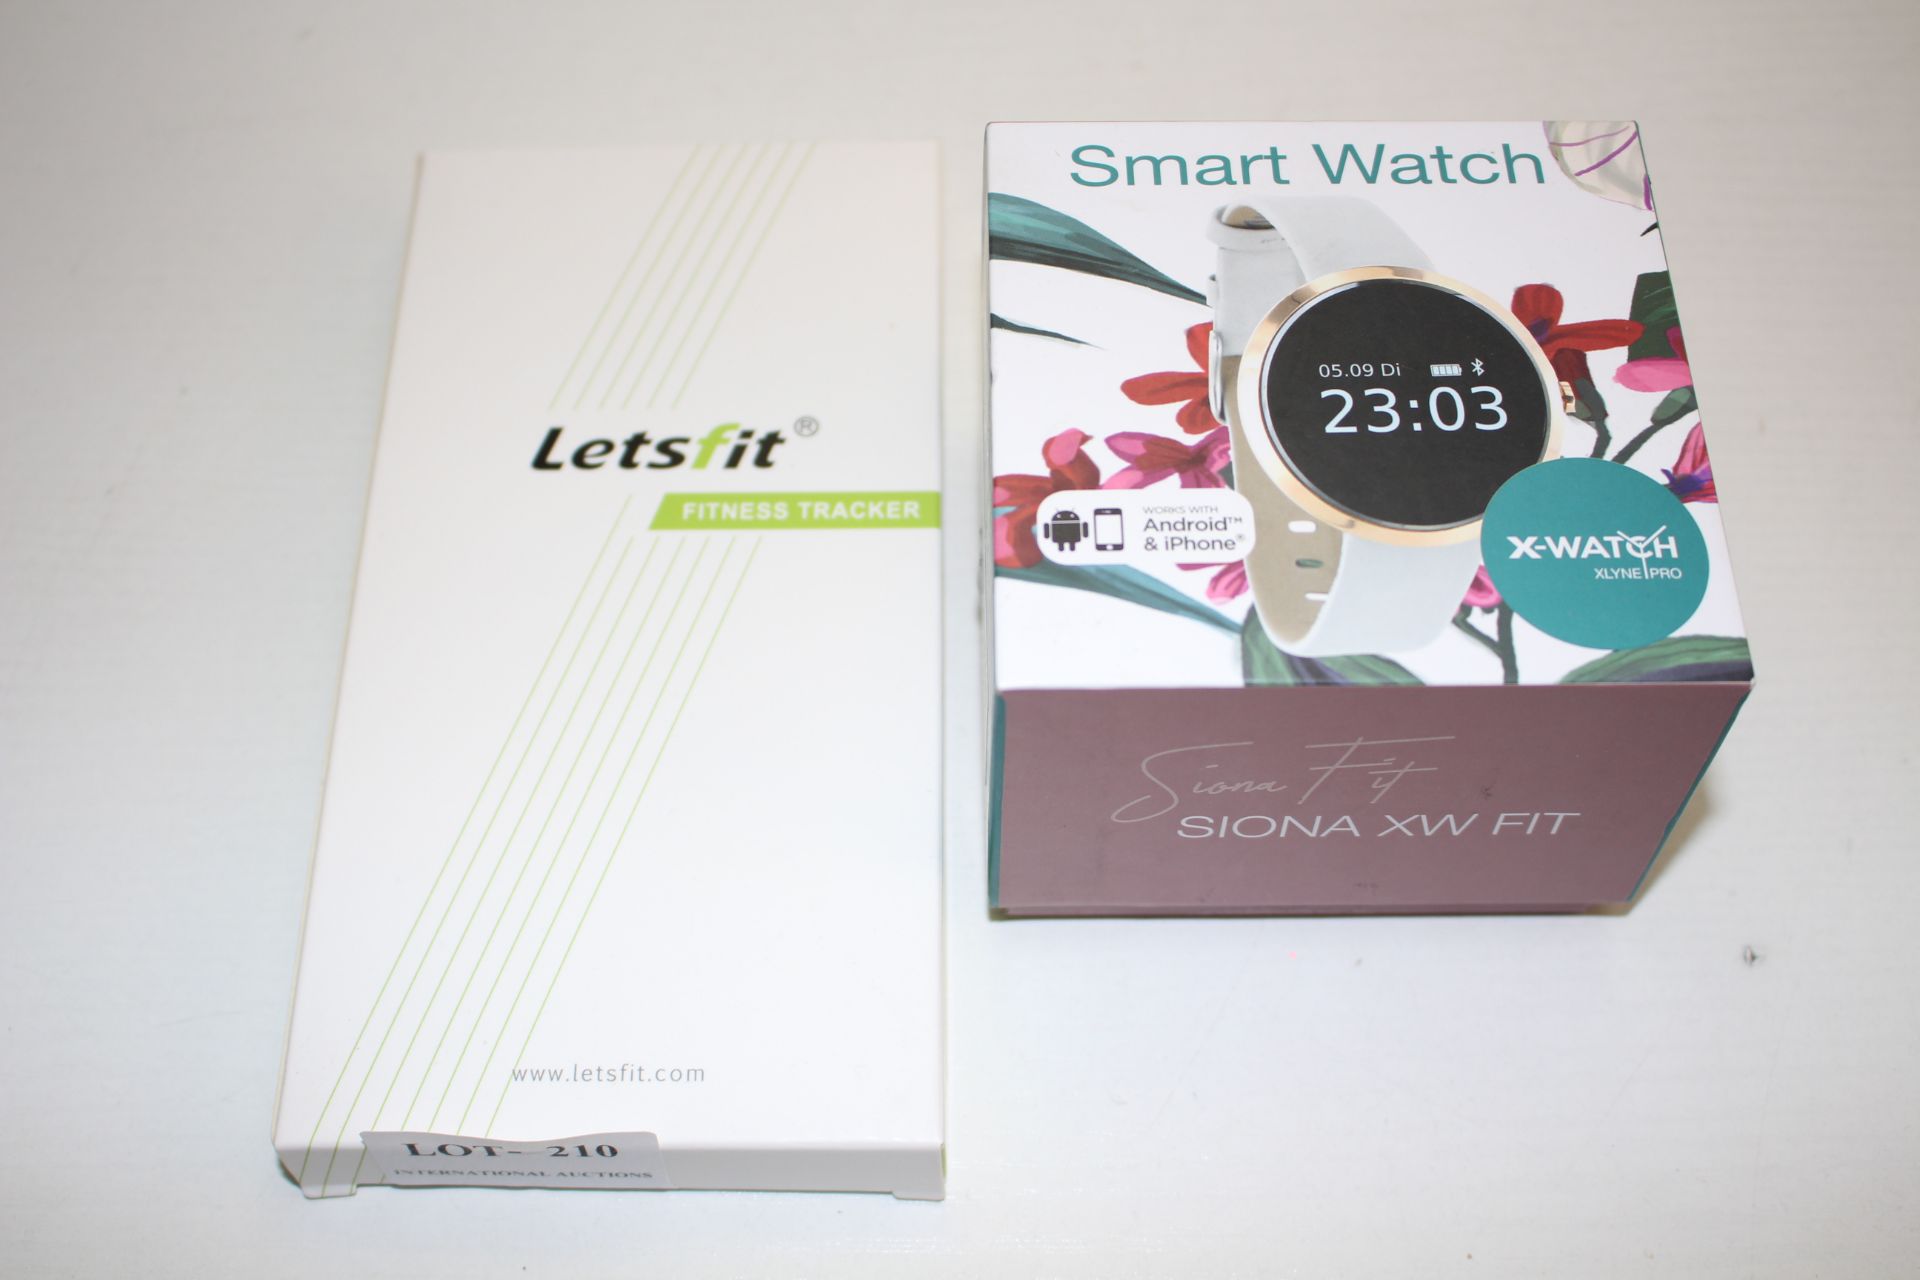 2X ASSORTED BOXED ITEMS TO INCLUDE SIONA XW FIT SMART WATCH & LETSFIT FITNESS TRACKER Condition